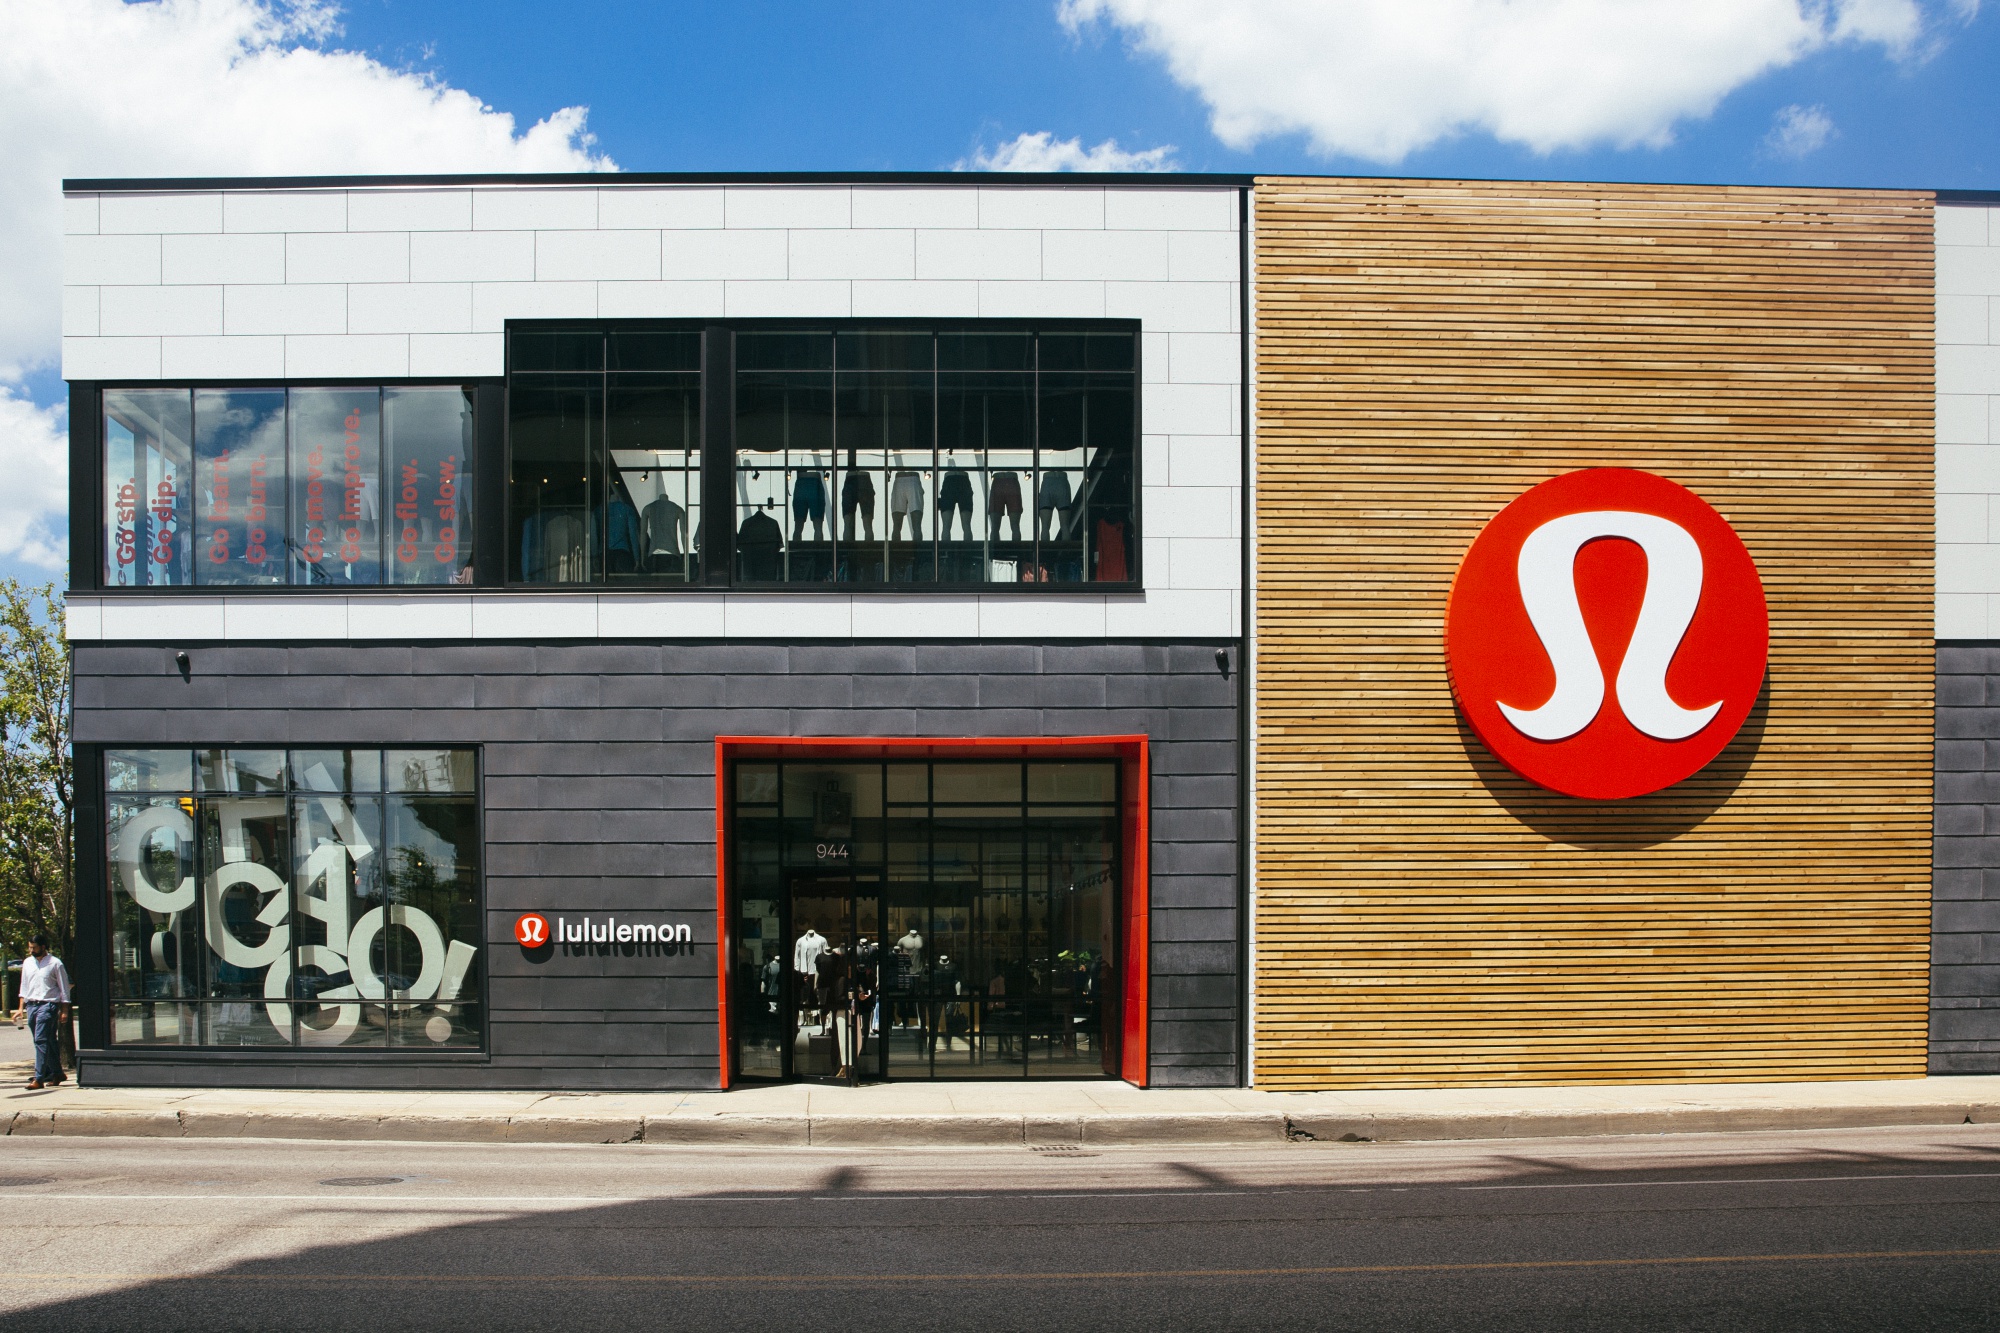 Lululemon Now Being Sold in Lake Charles